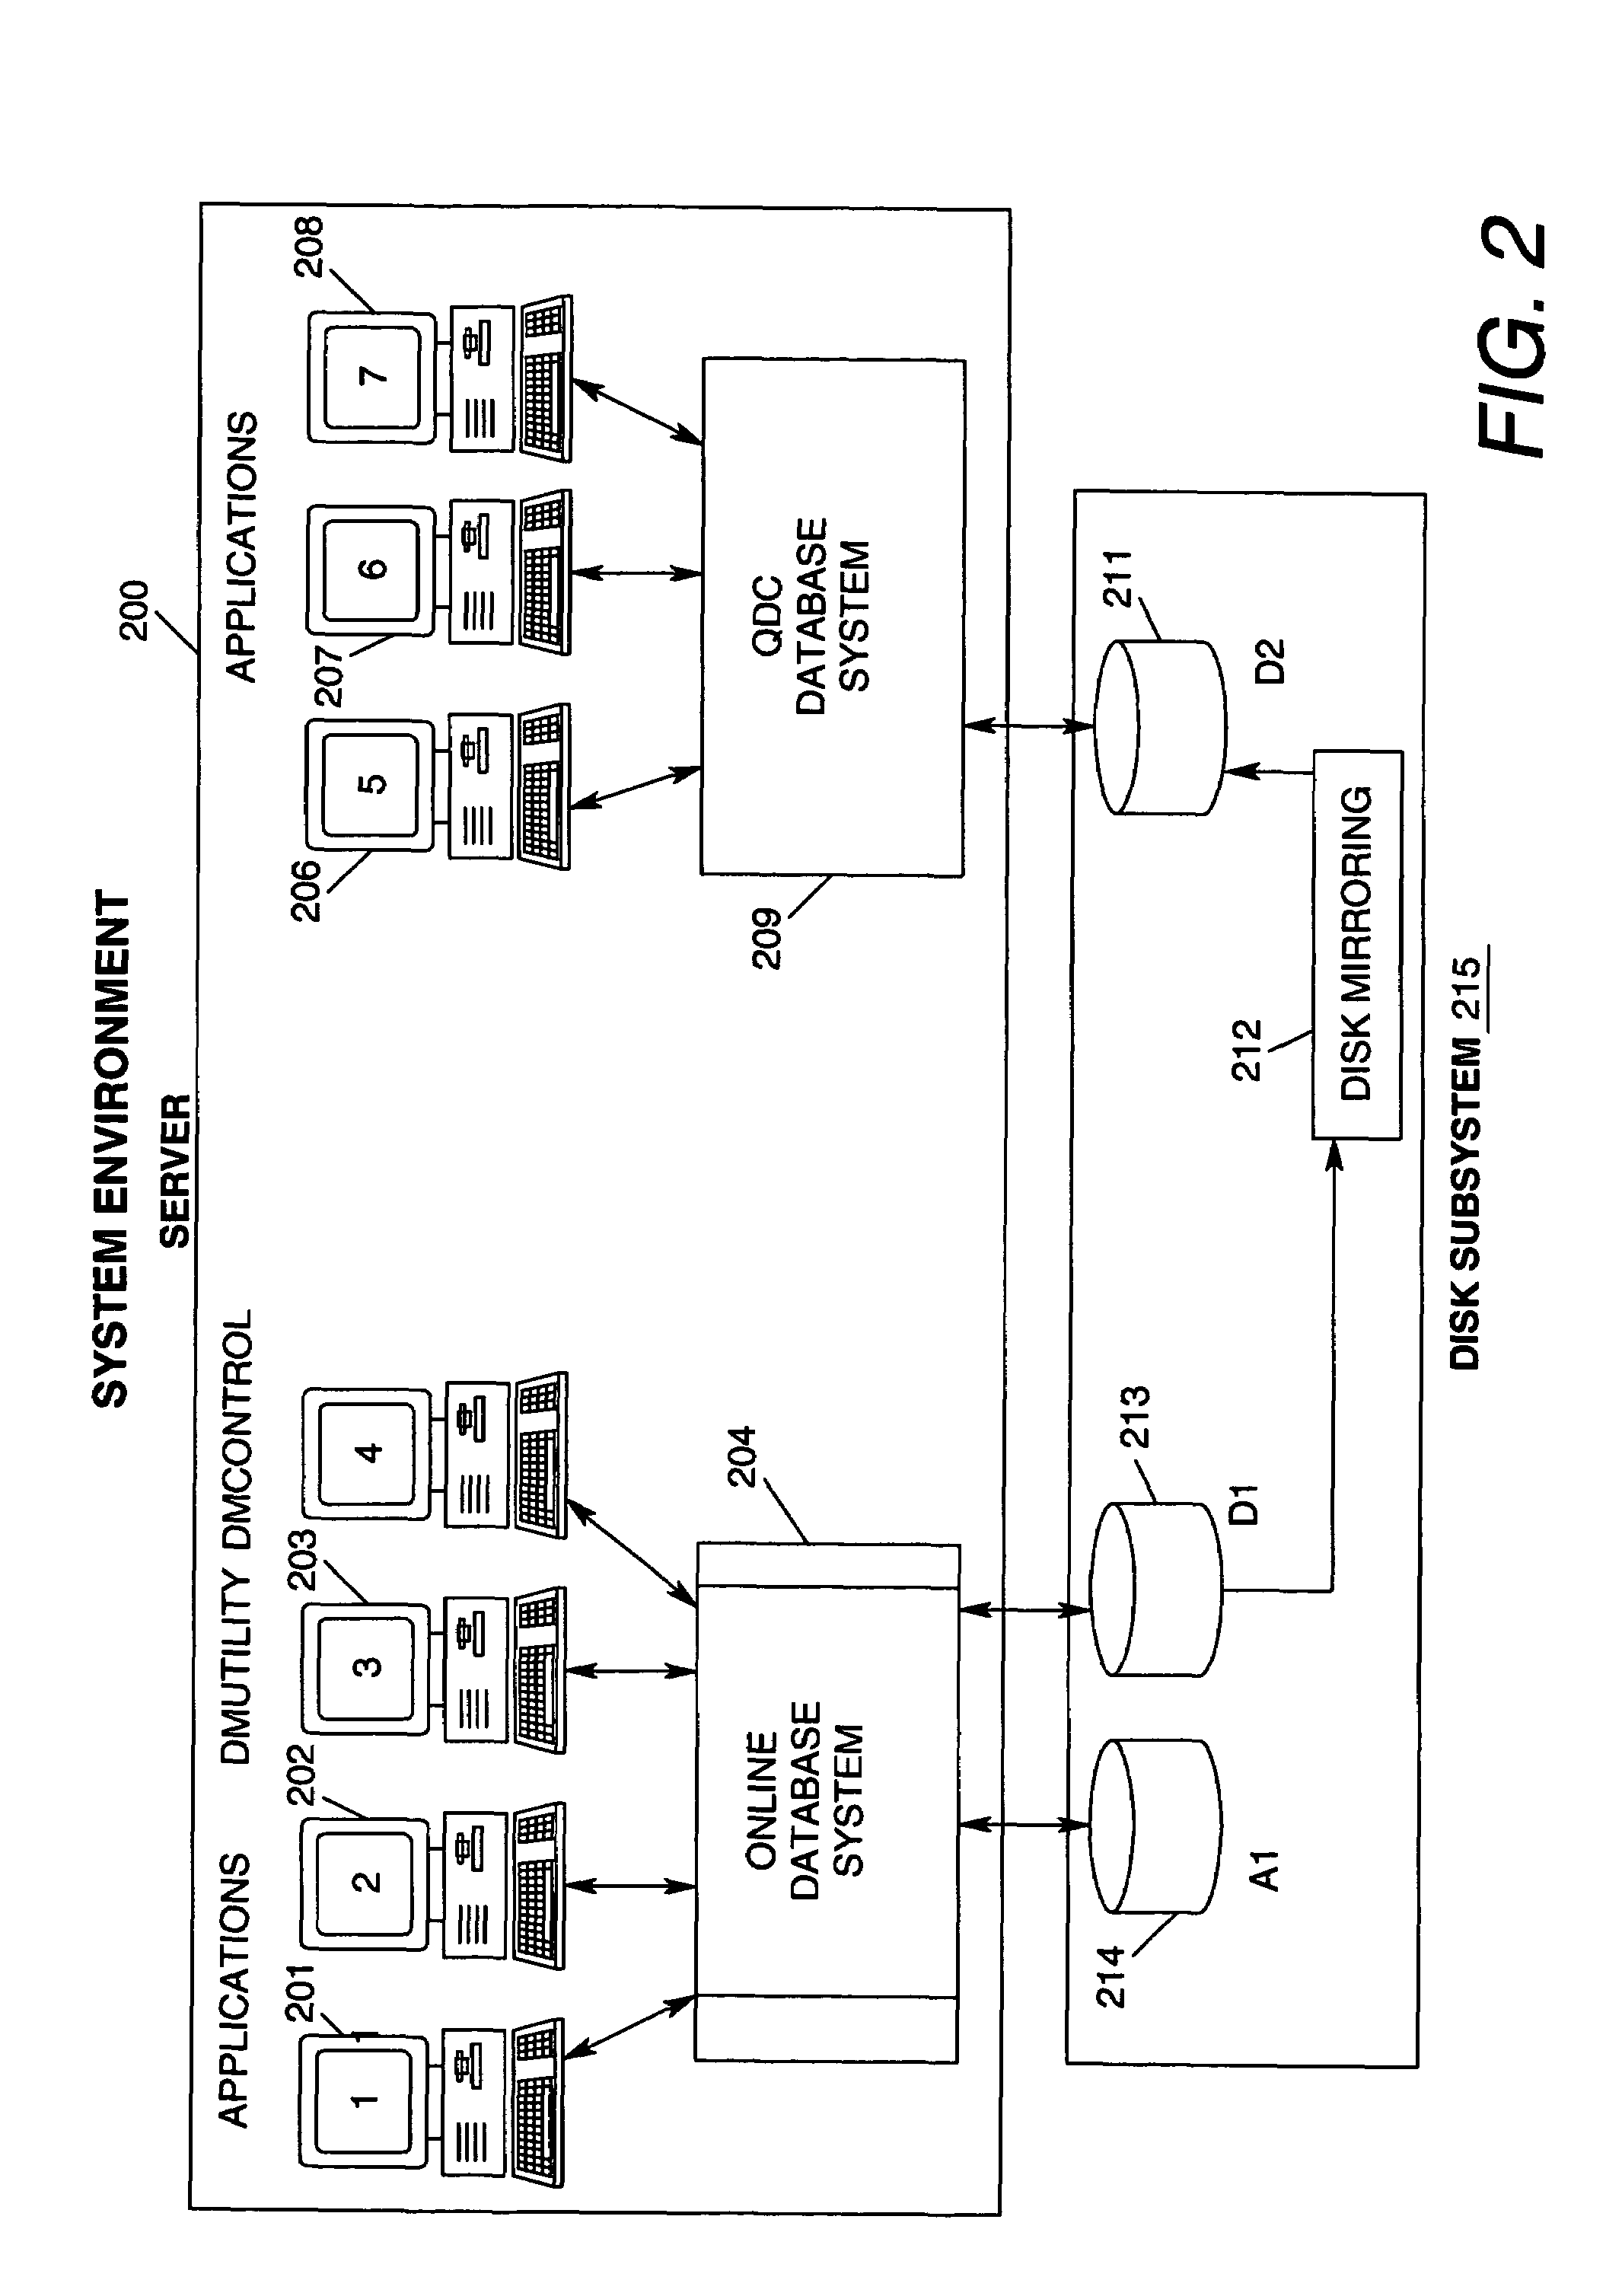 System and method for creating multiple QUIESCE database copies at a single server